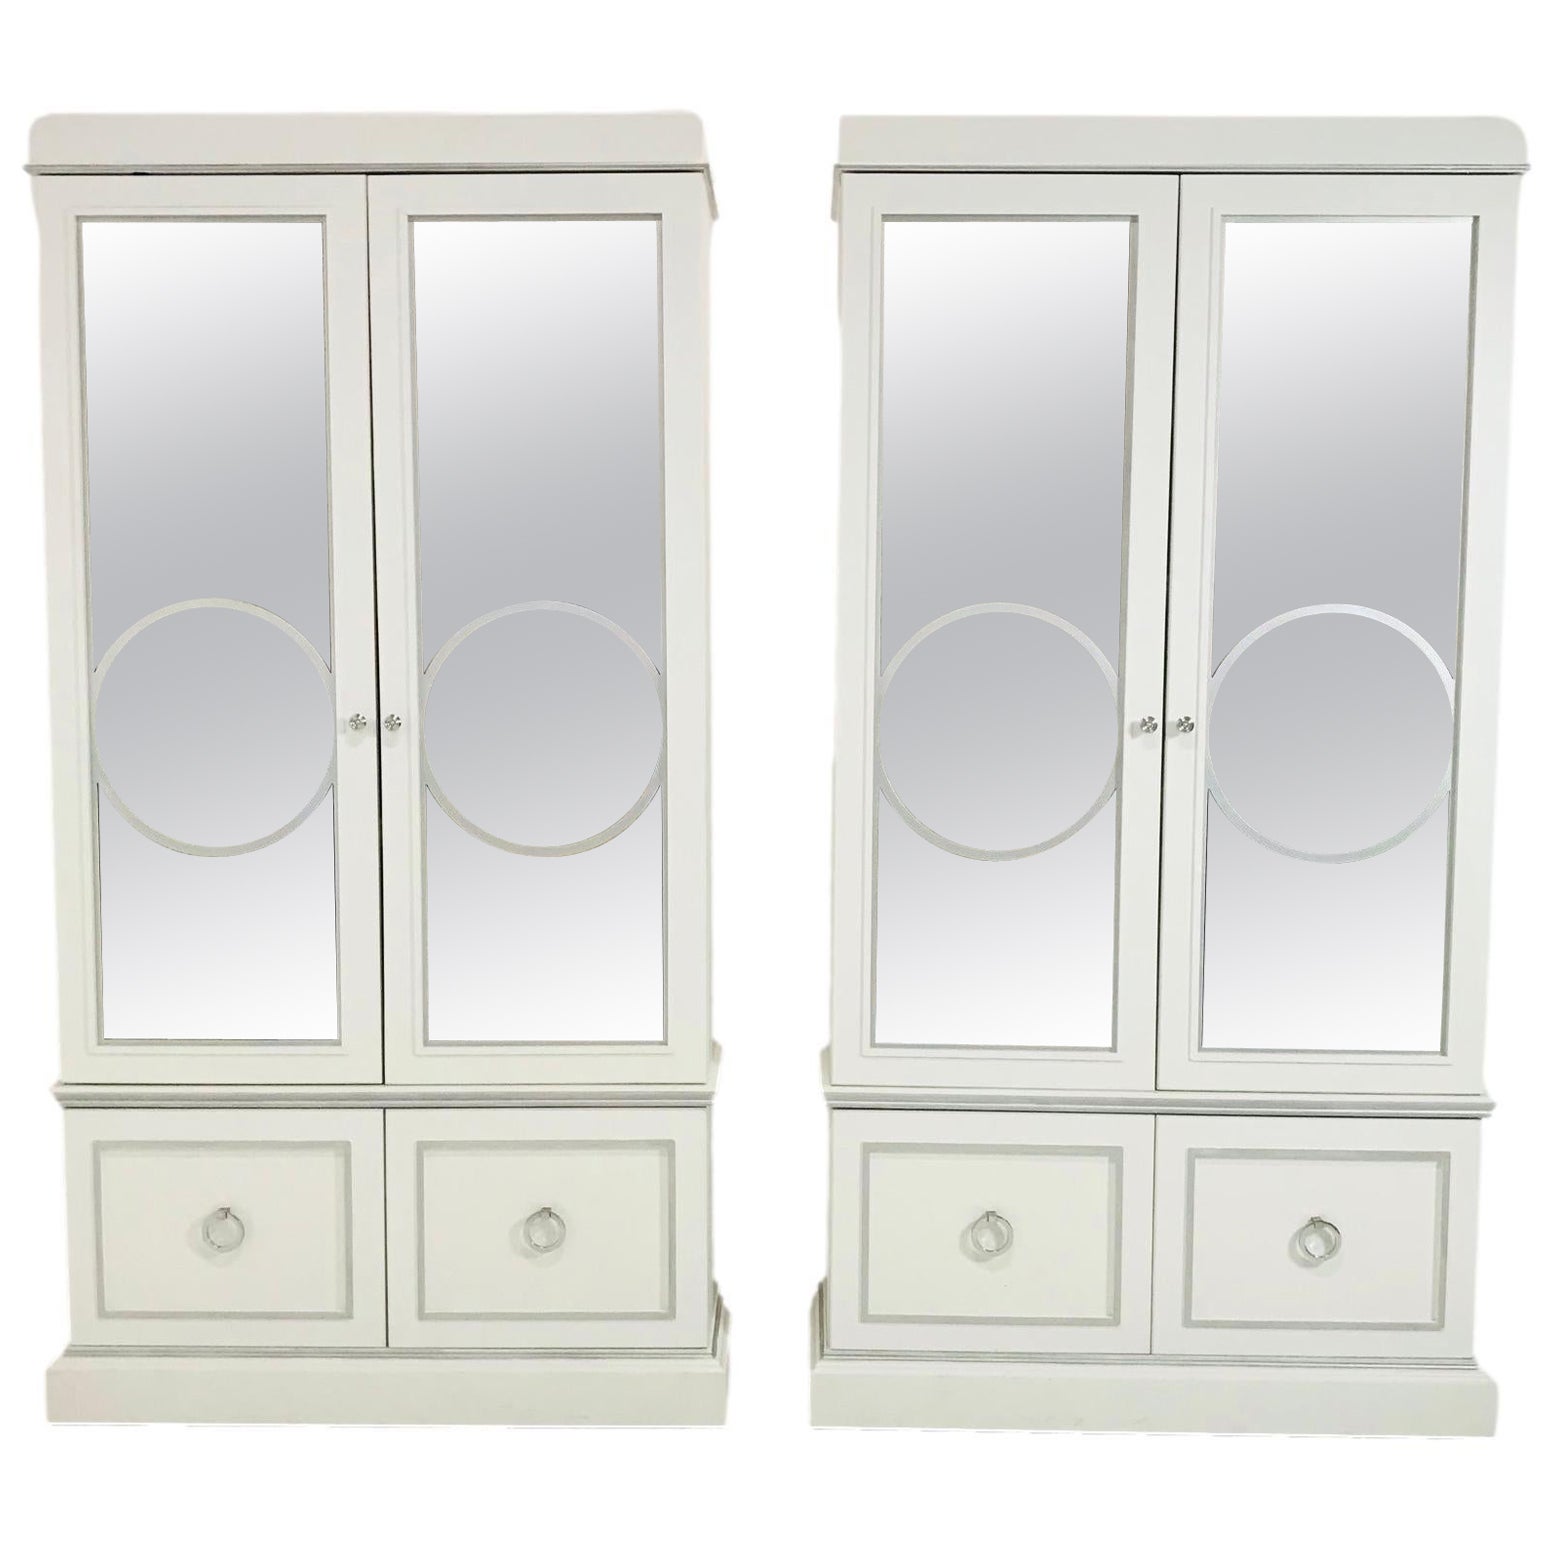 Pair of Mirror Front Curio Cabinets